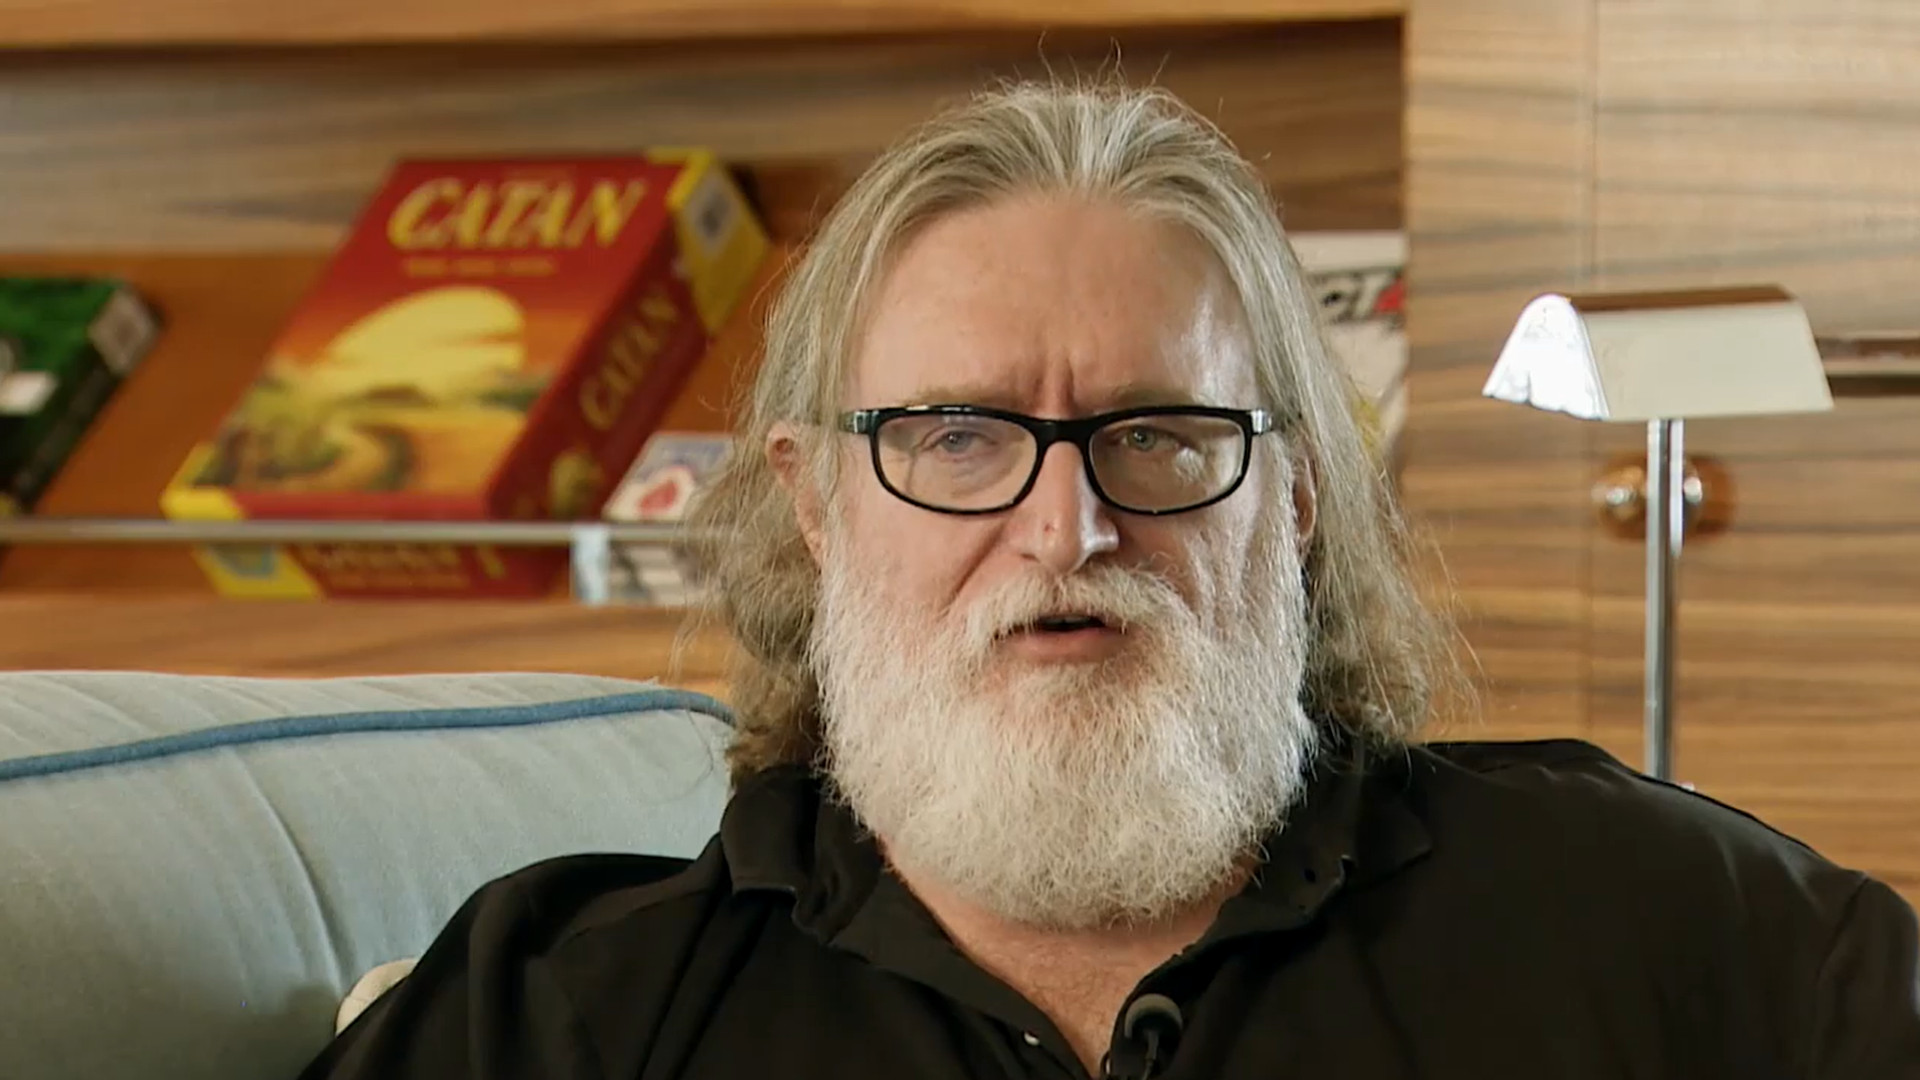 Gabe Newell's Problem Isn't With NFTs Or Metaverse, But The 'Bad Actors'  Behind Them